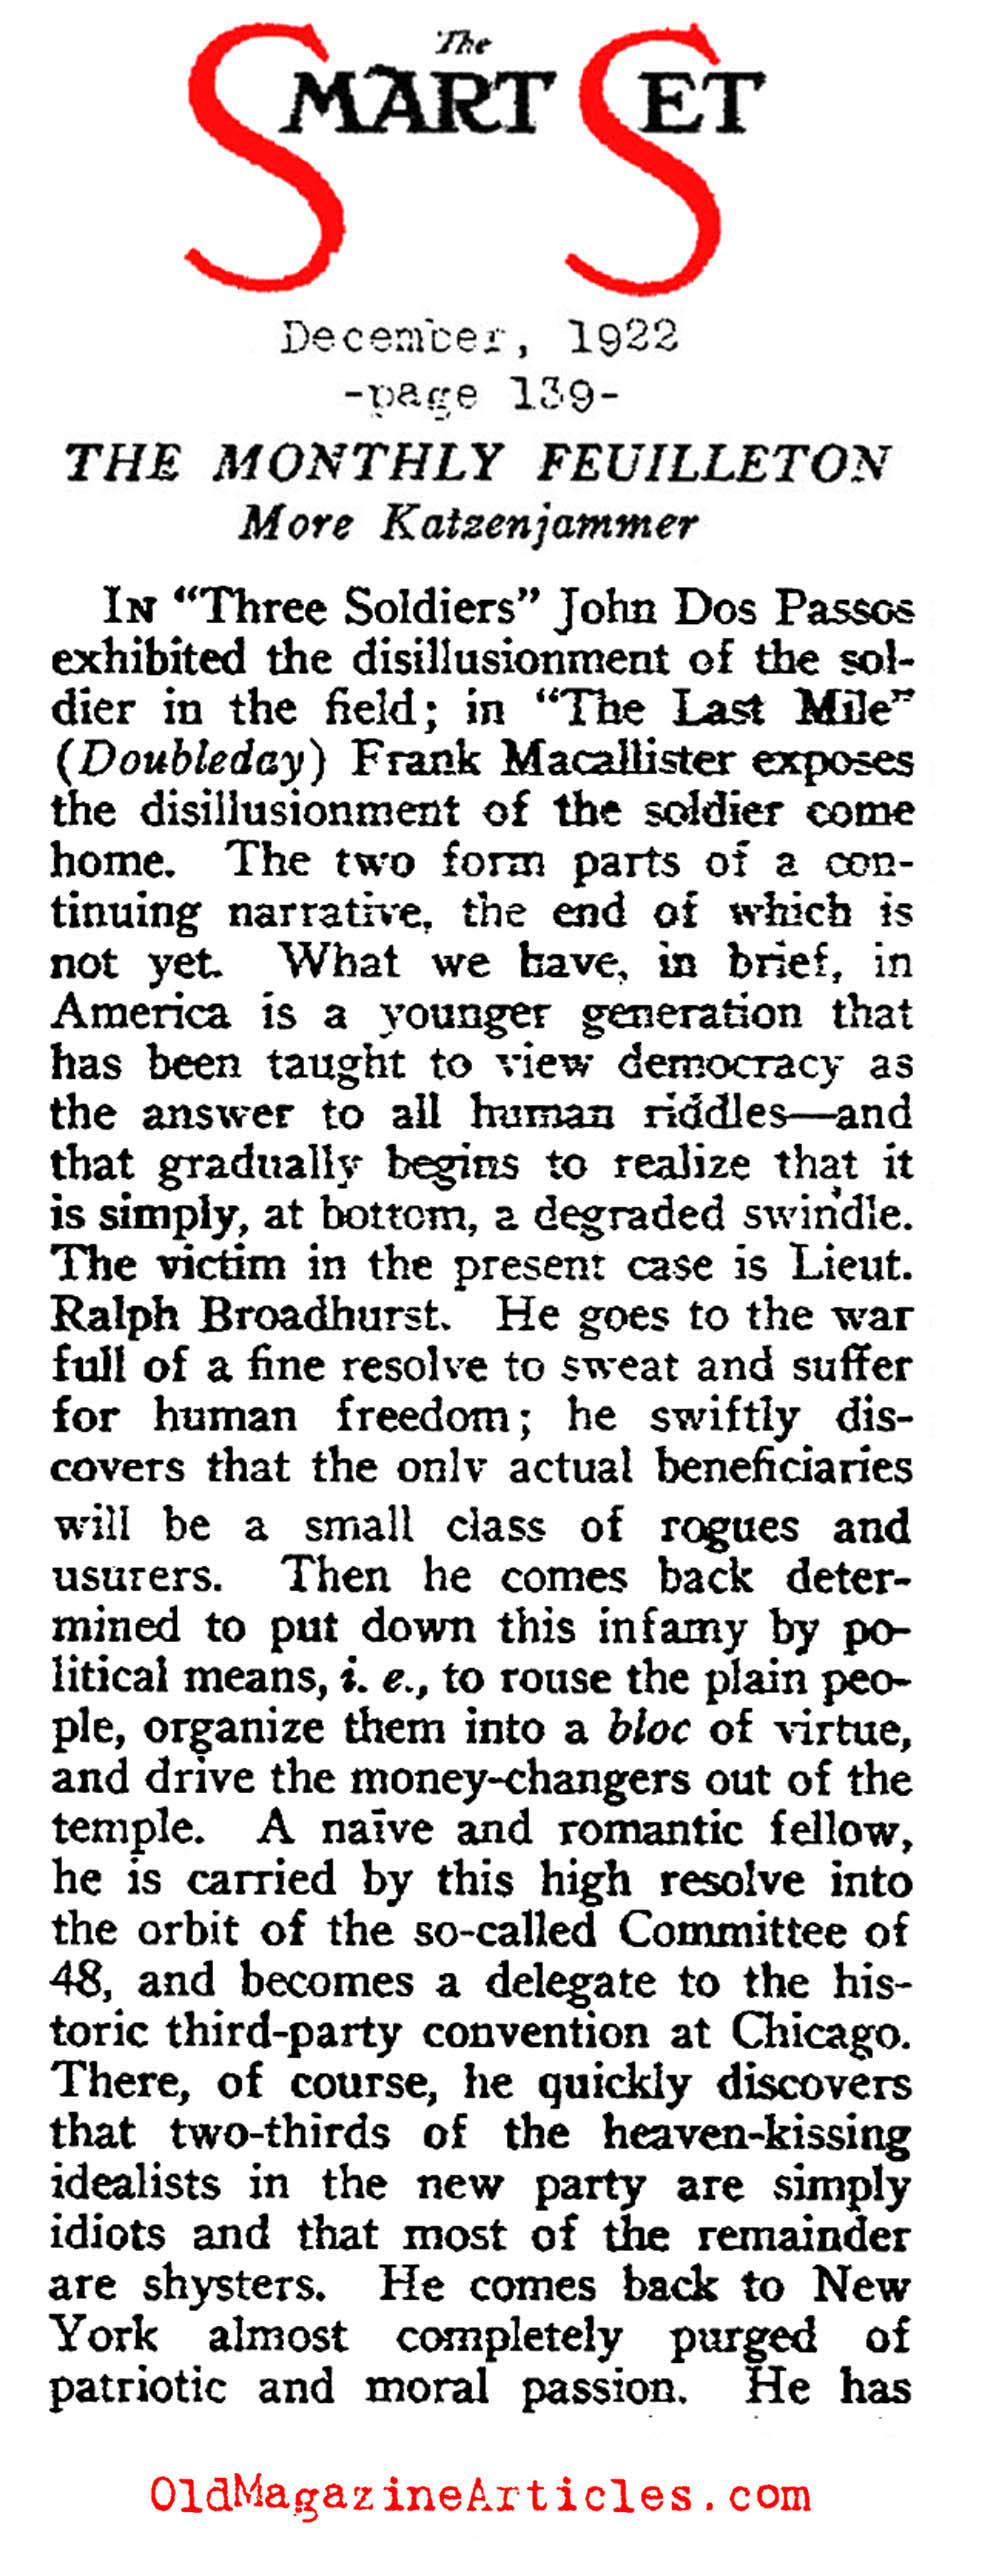 H.L. Mencken  Reviewed Two Novels Dealing the War and Disillusionment  (The Smart Set, 1922)